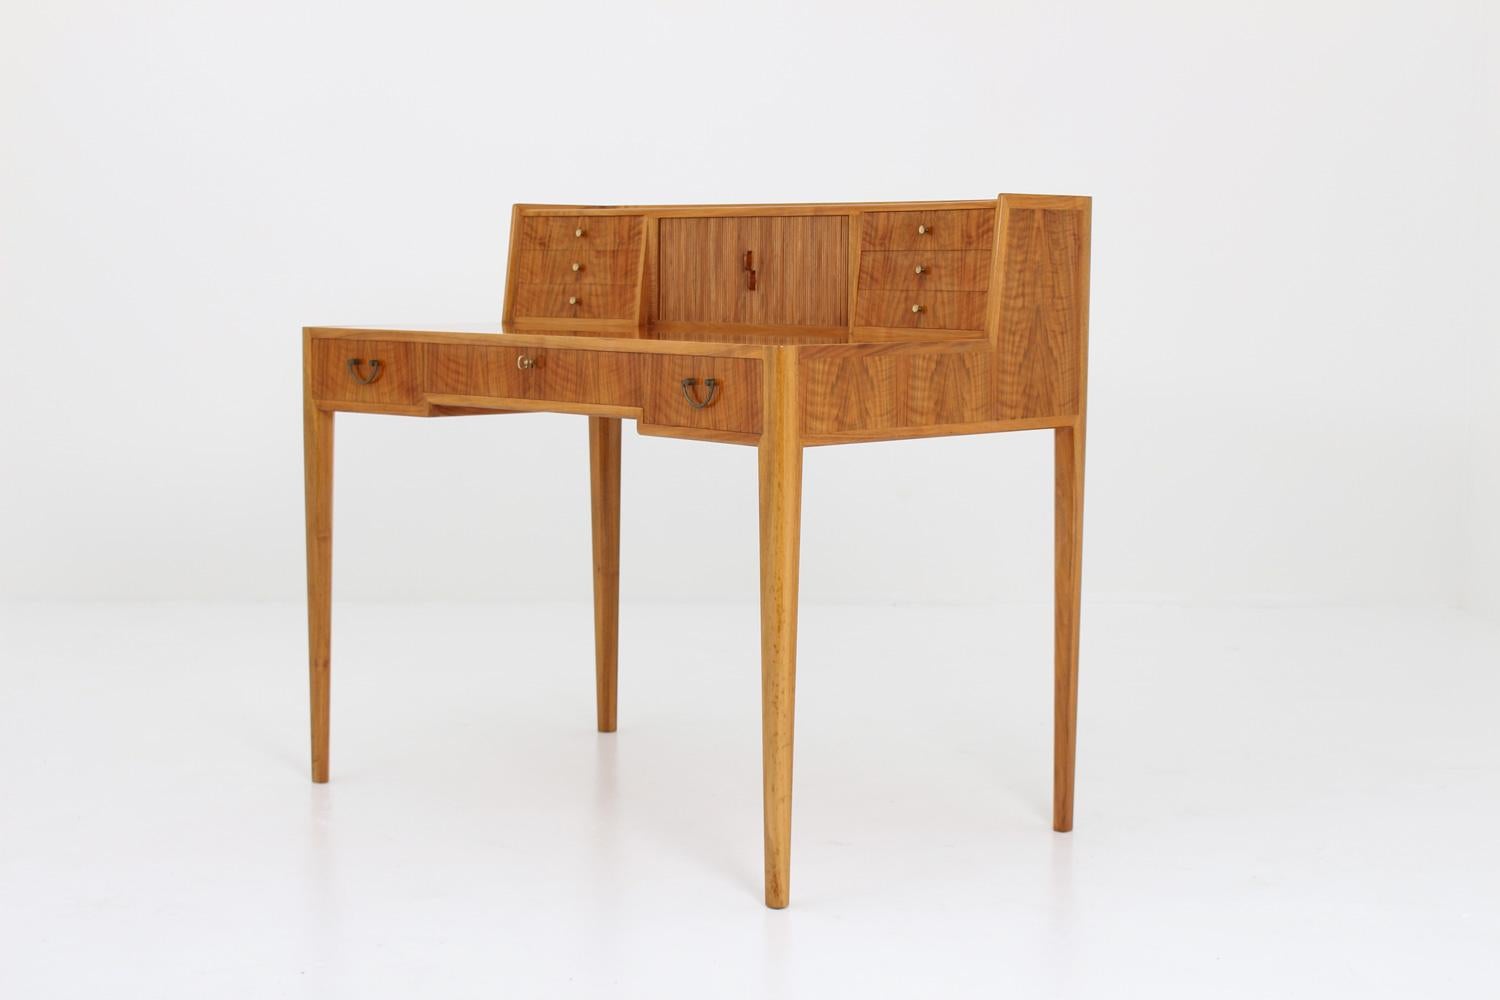 Incredible desk in Italian walnut by Swedish cabinet maker, circa 1960.
This studio craft desk is made with perfection in every detail. The desk is slightly rounded both at the front and the back. It features six small drawers and a jalousie on the